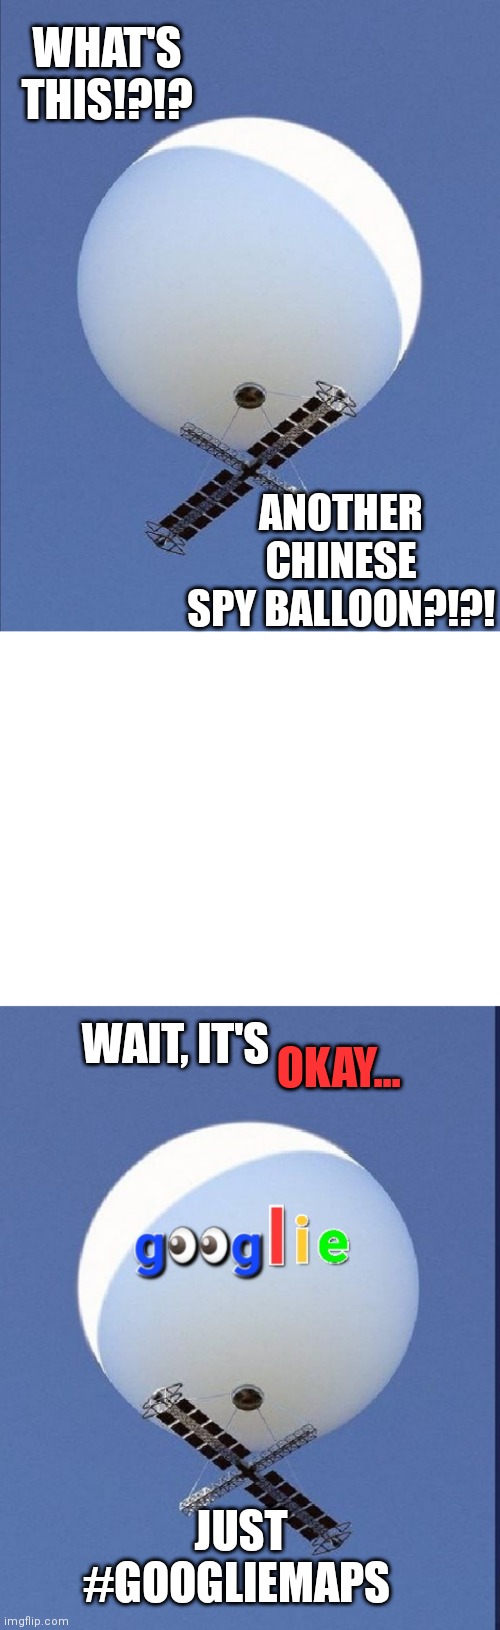 Relax; it's just #googlieMaps (2) | WHAT'S THIS!?!? ANOTHER CHINESE SPY BALLOON?!?! OKAY... WAIT, IT'S; JUST #GOOGLIEMAPS | image tagged in chinese spy balloon,spy balloon,spy,balloon,balloons,hot air balloon | made w/ Imgflip meme maker